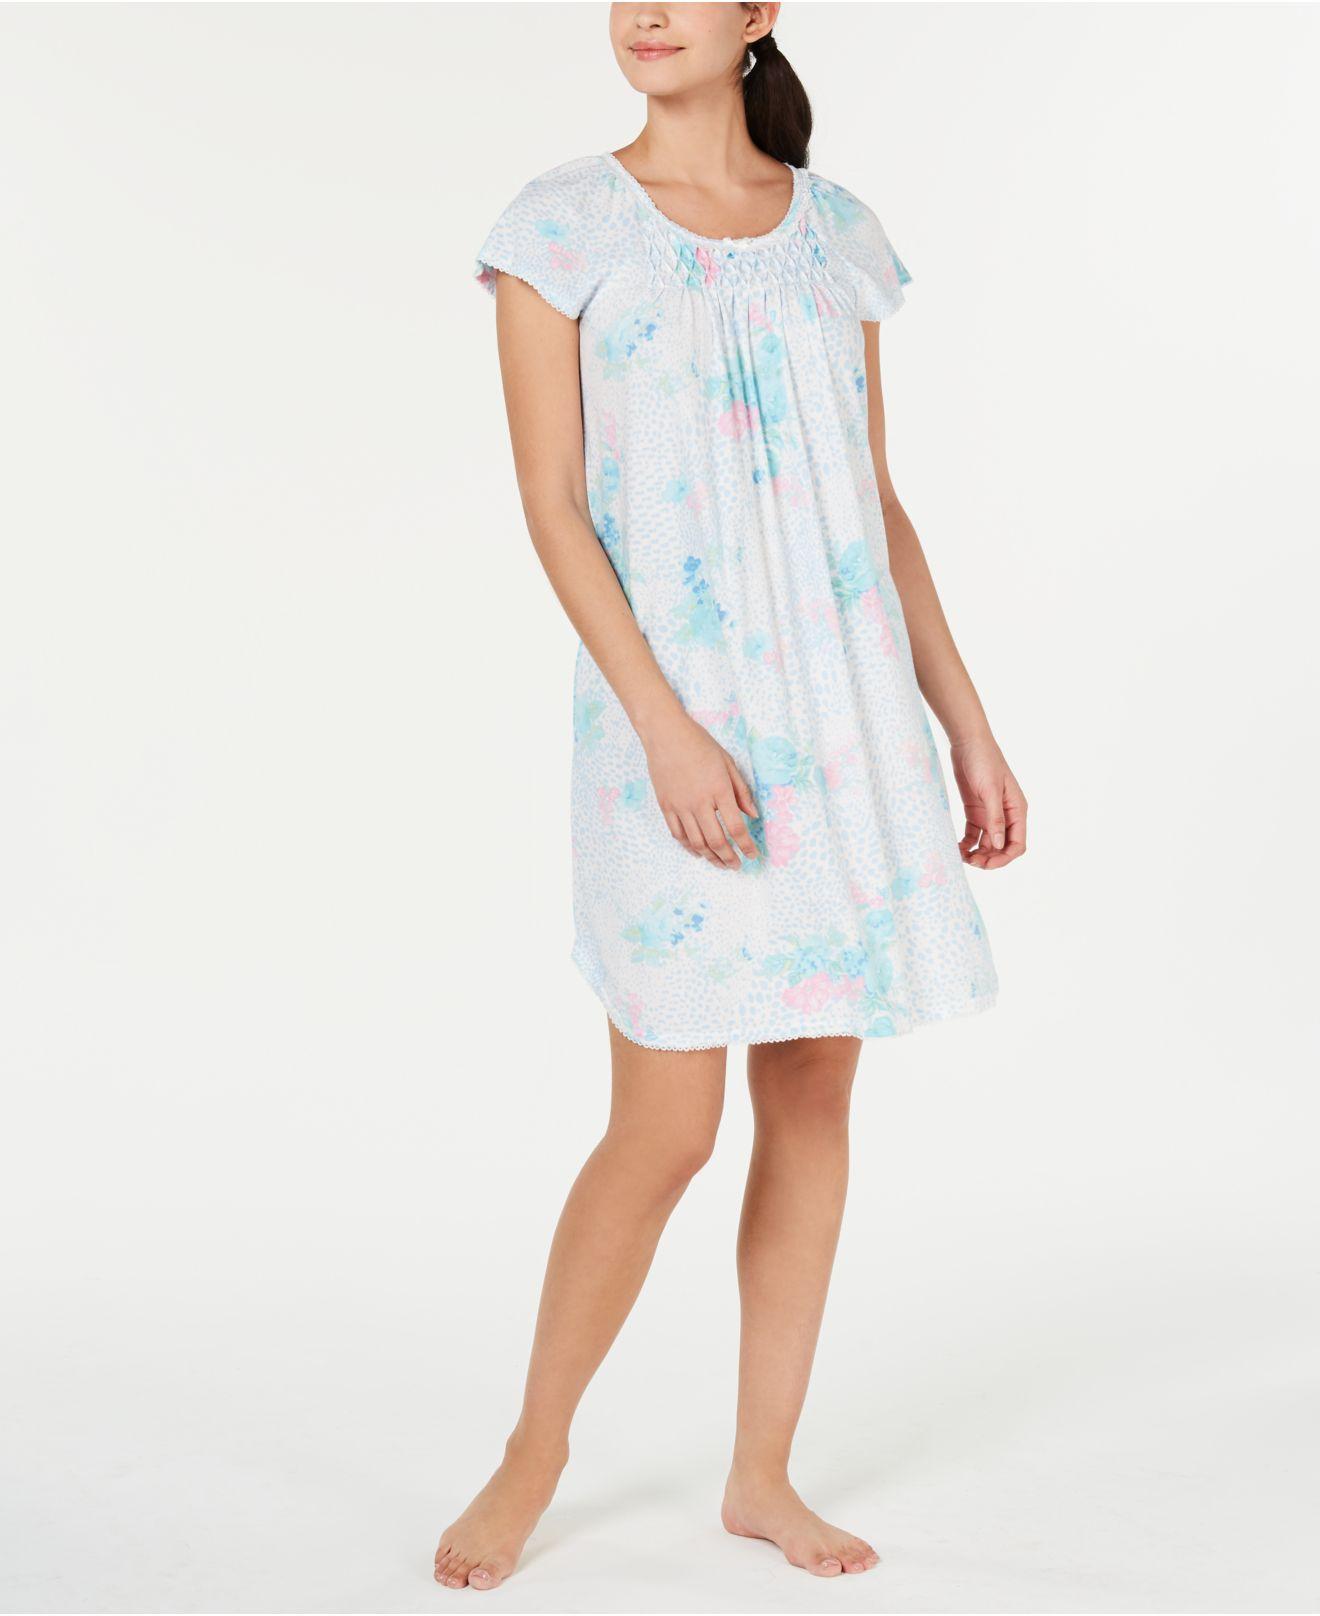 Lyst - Miss Elaine Printed Knit Nightgown in Blue